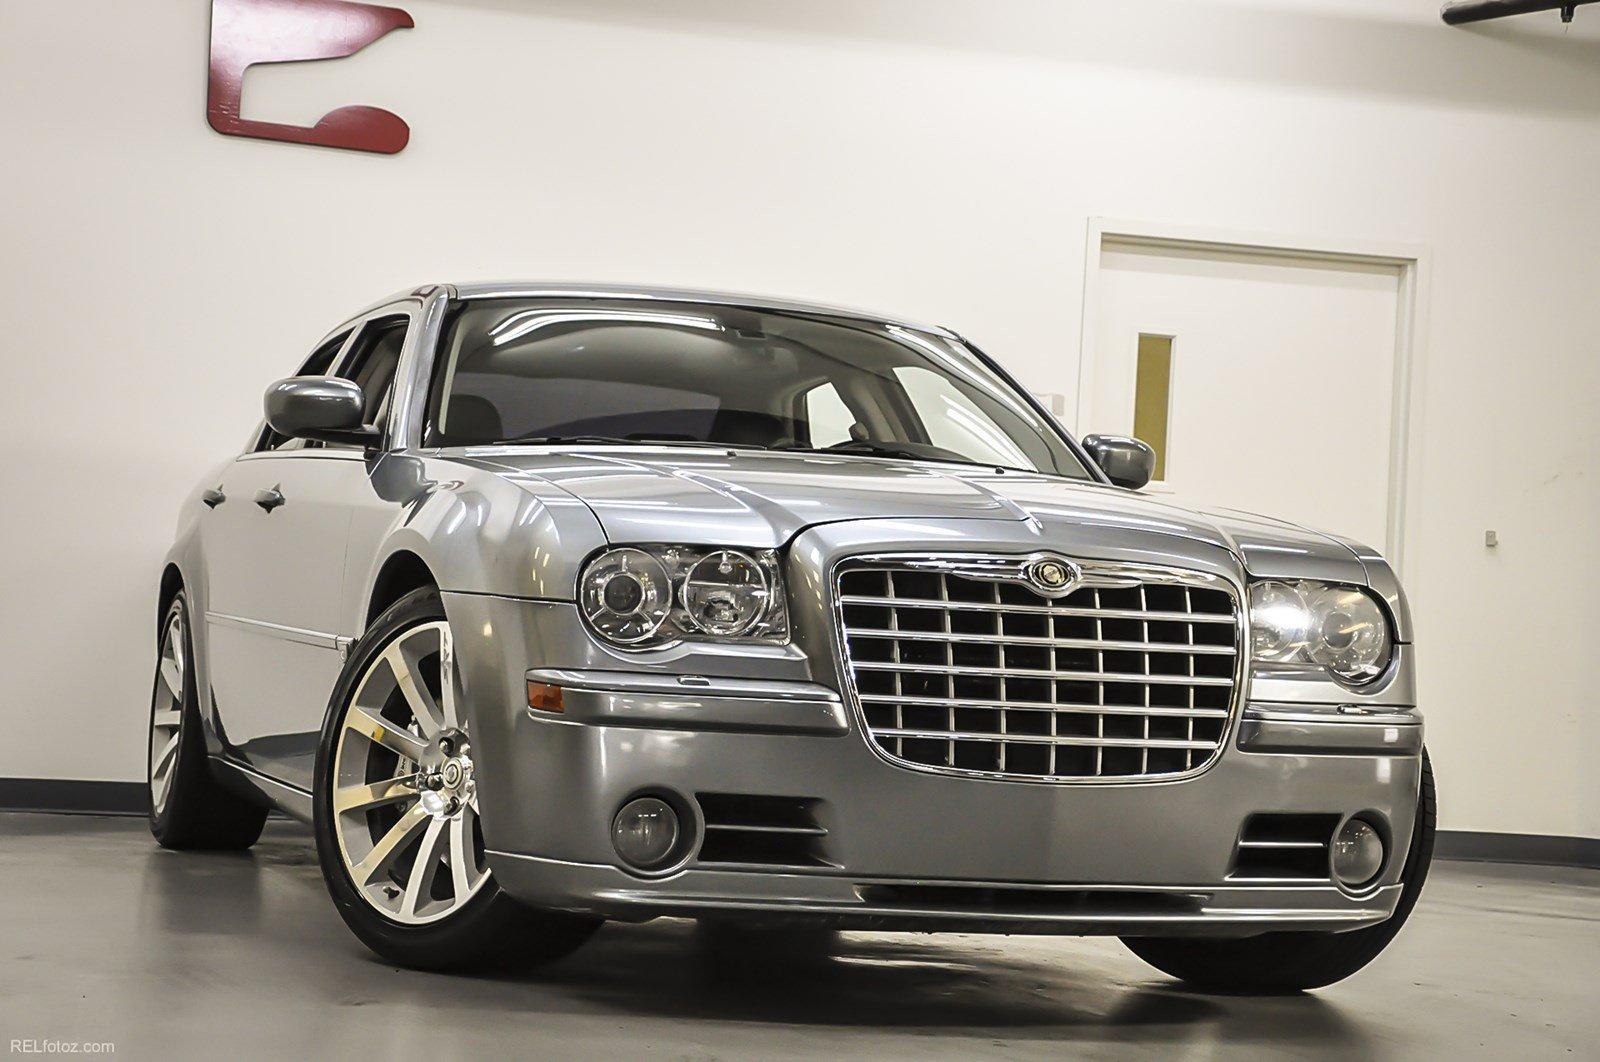 Used Chrysler 300 C for Sale